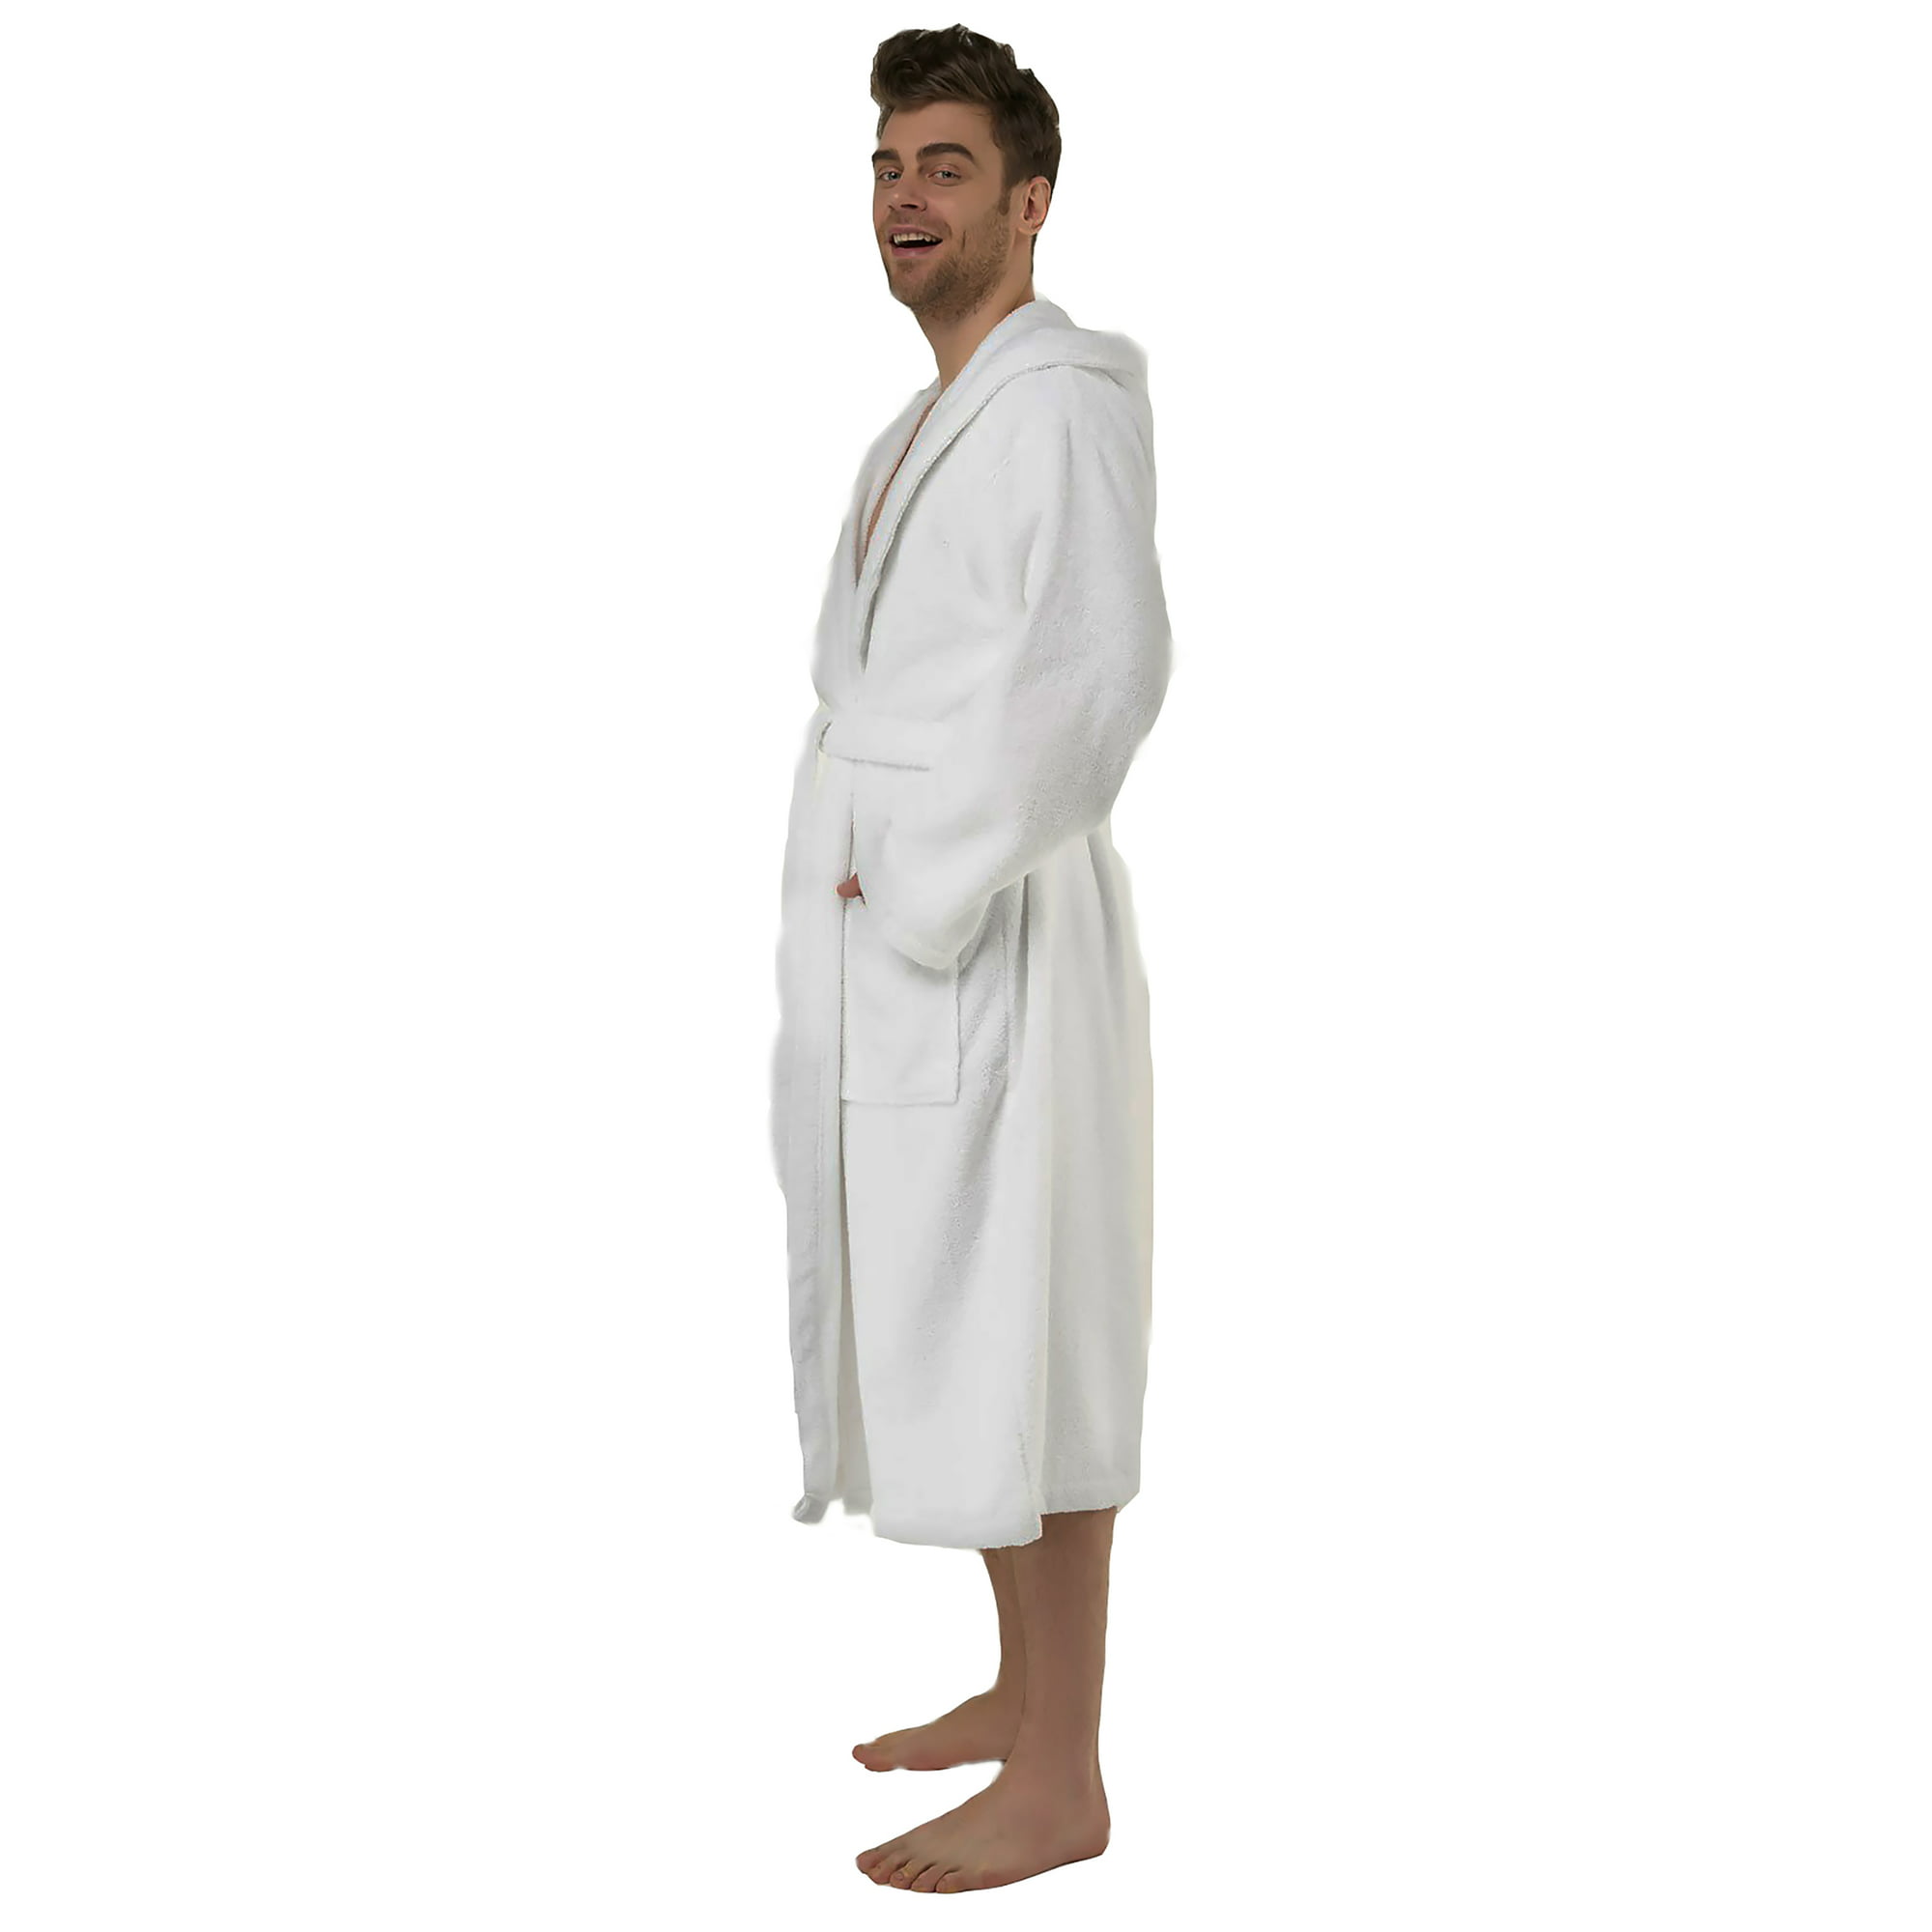 Spa & Resort Sales Bright White Hooded Bath Robe for Men, Fist most Medium, Large and XL Sizes, Long sleeves. 